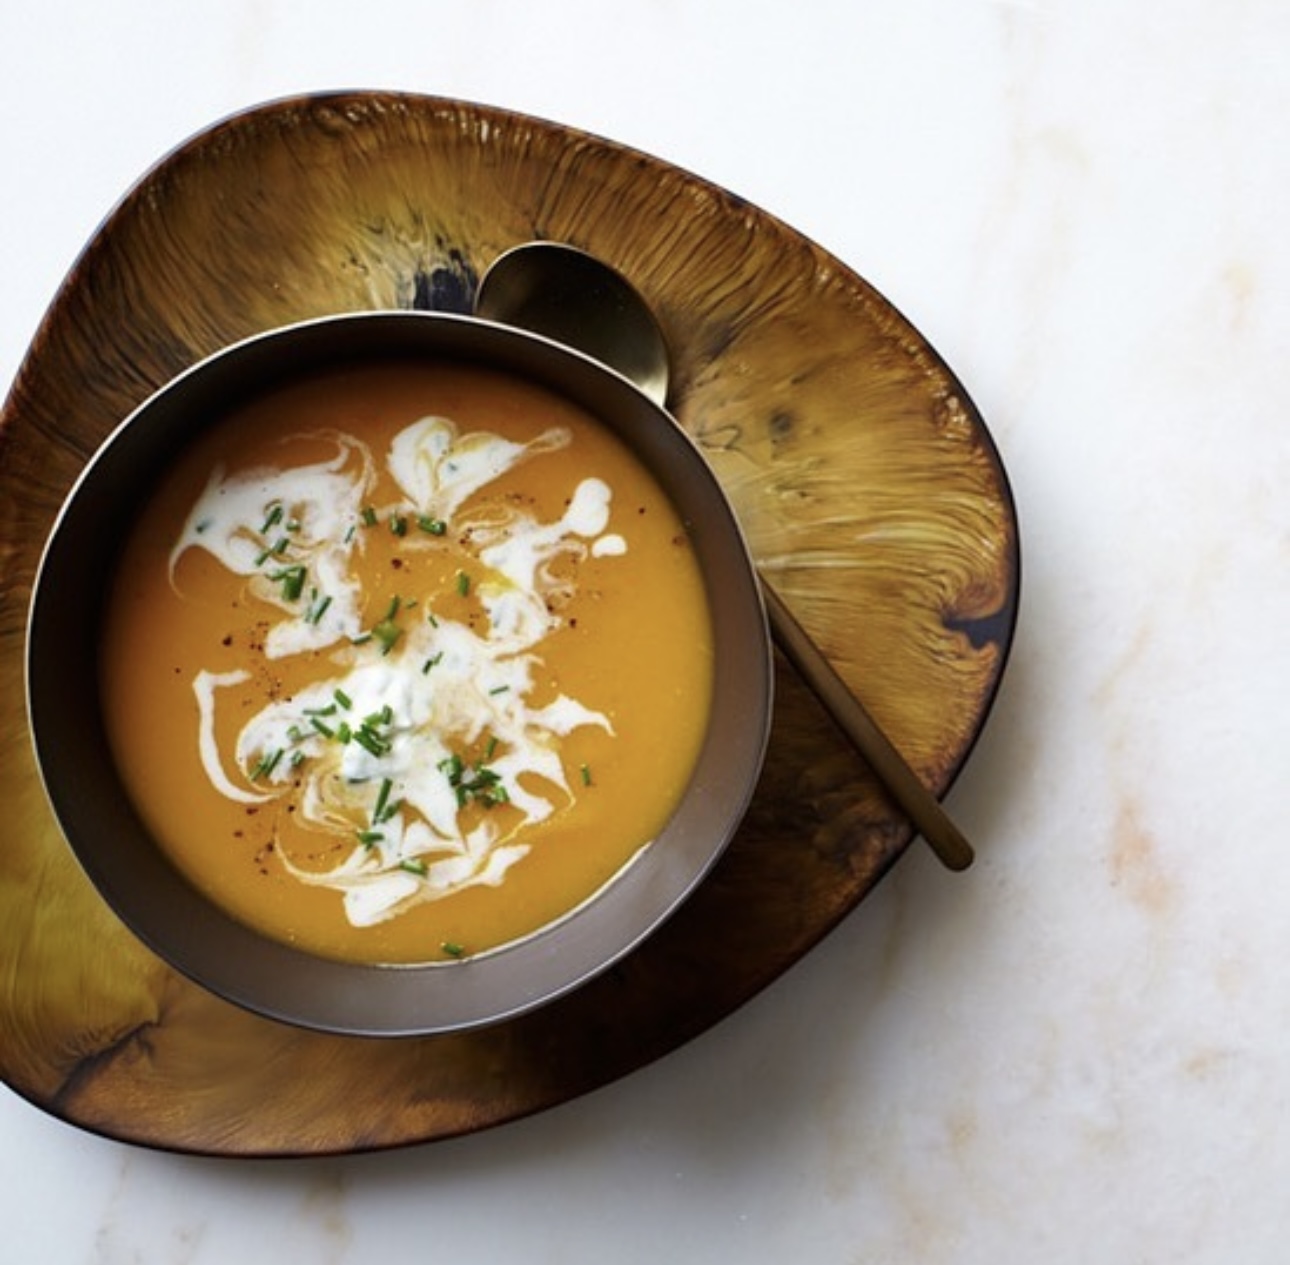 A bowl of butternut squash soup from Ma's Best Soup